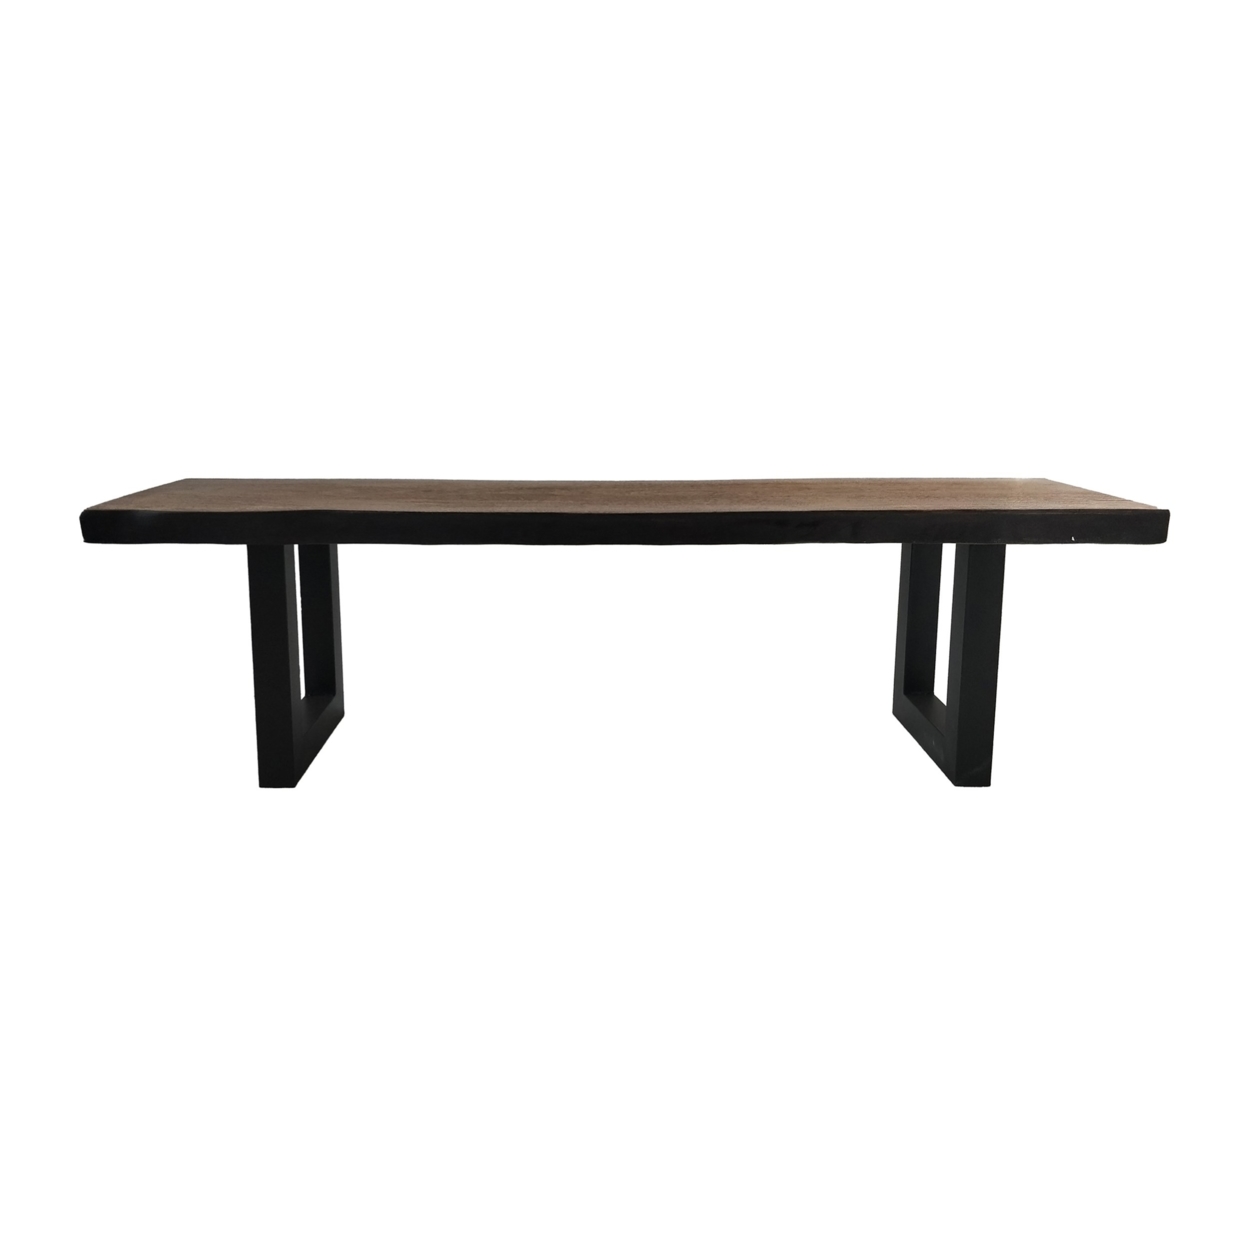 Jessica Indoor Faux Live Edge Teak Finish Light Weight Concrete Dining Bench